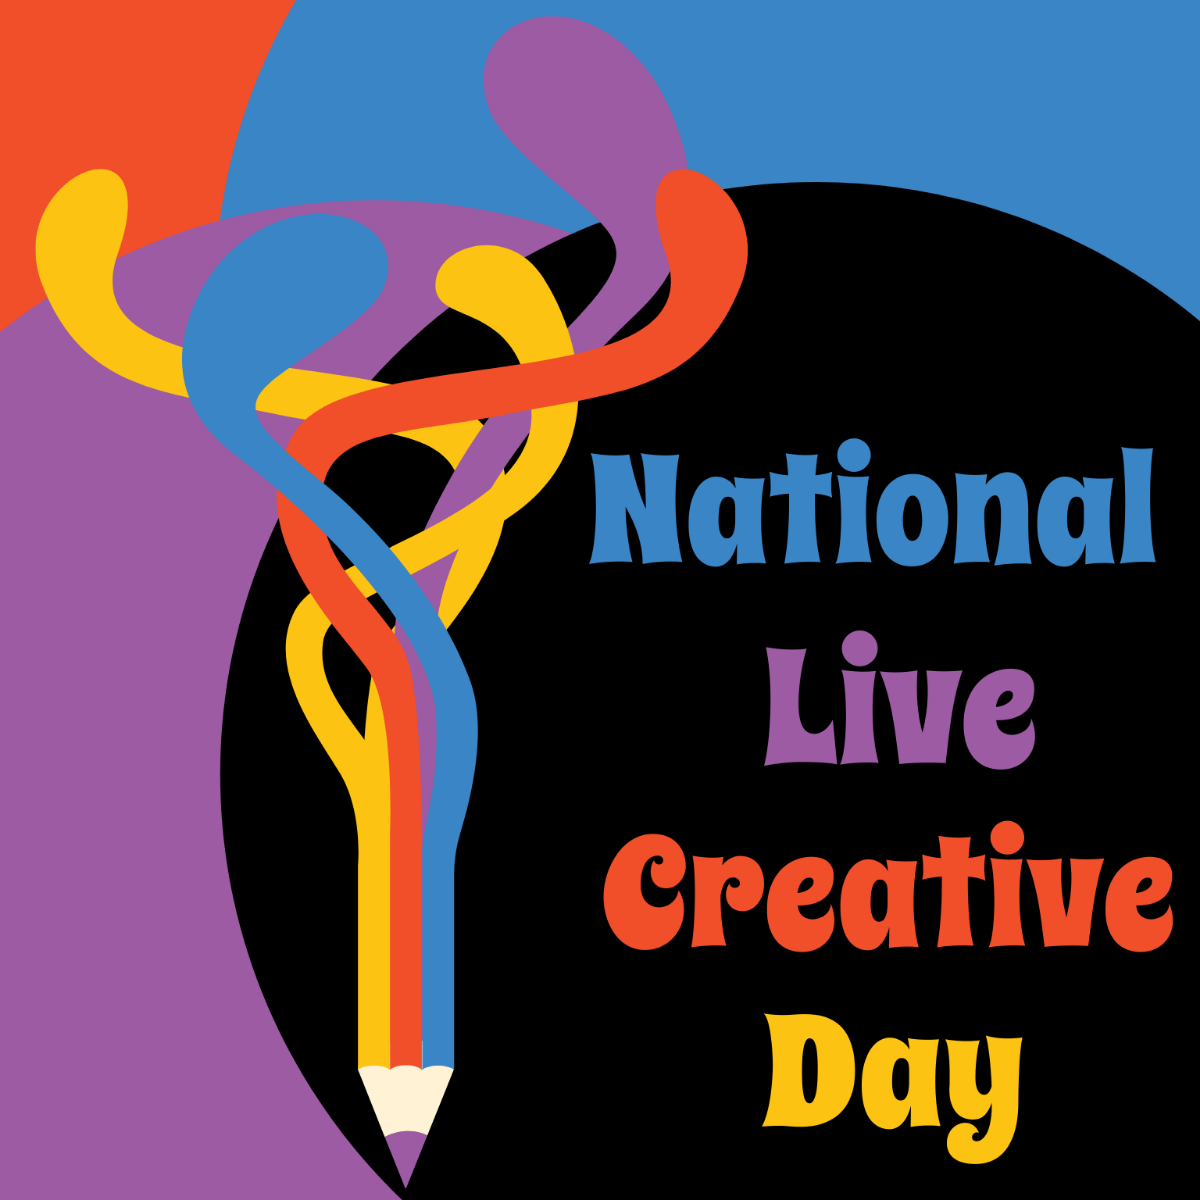 Free National Live Creative Day Illustration Template